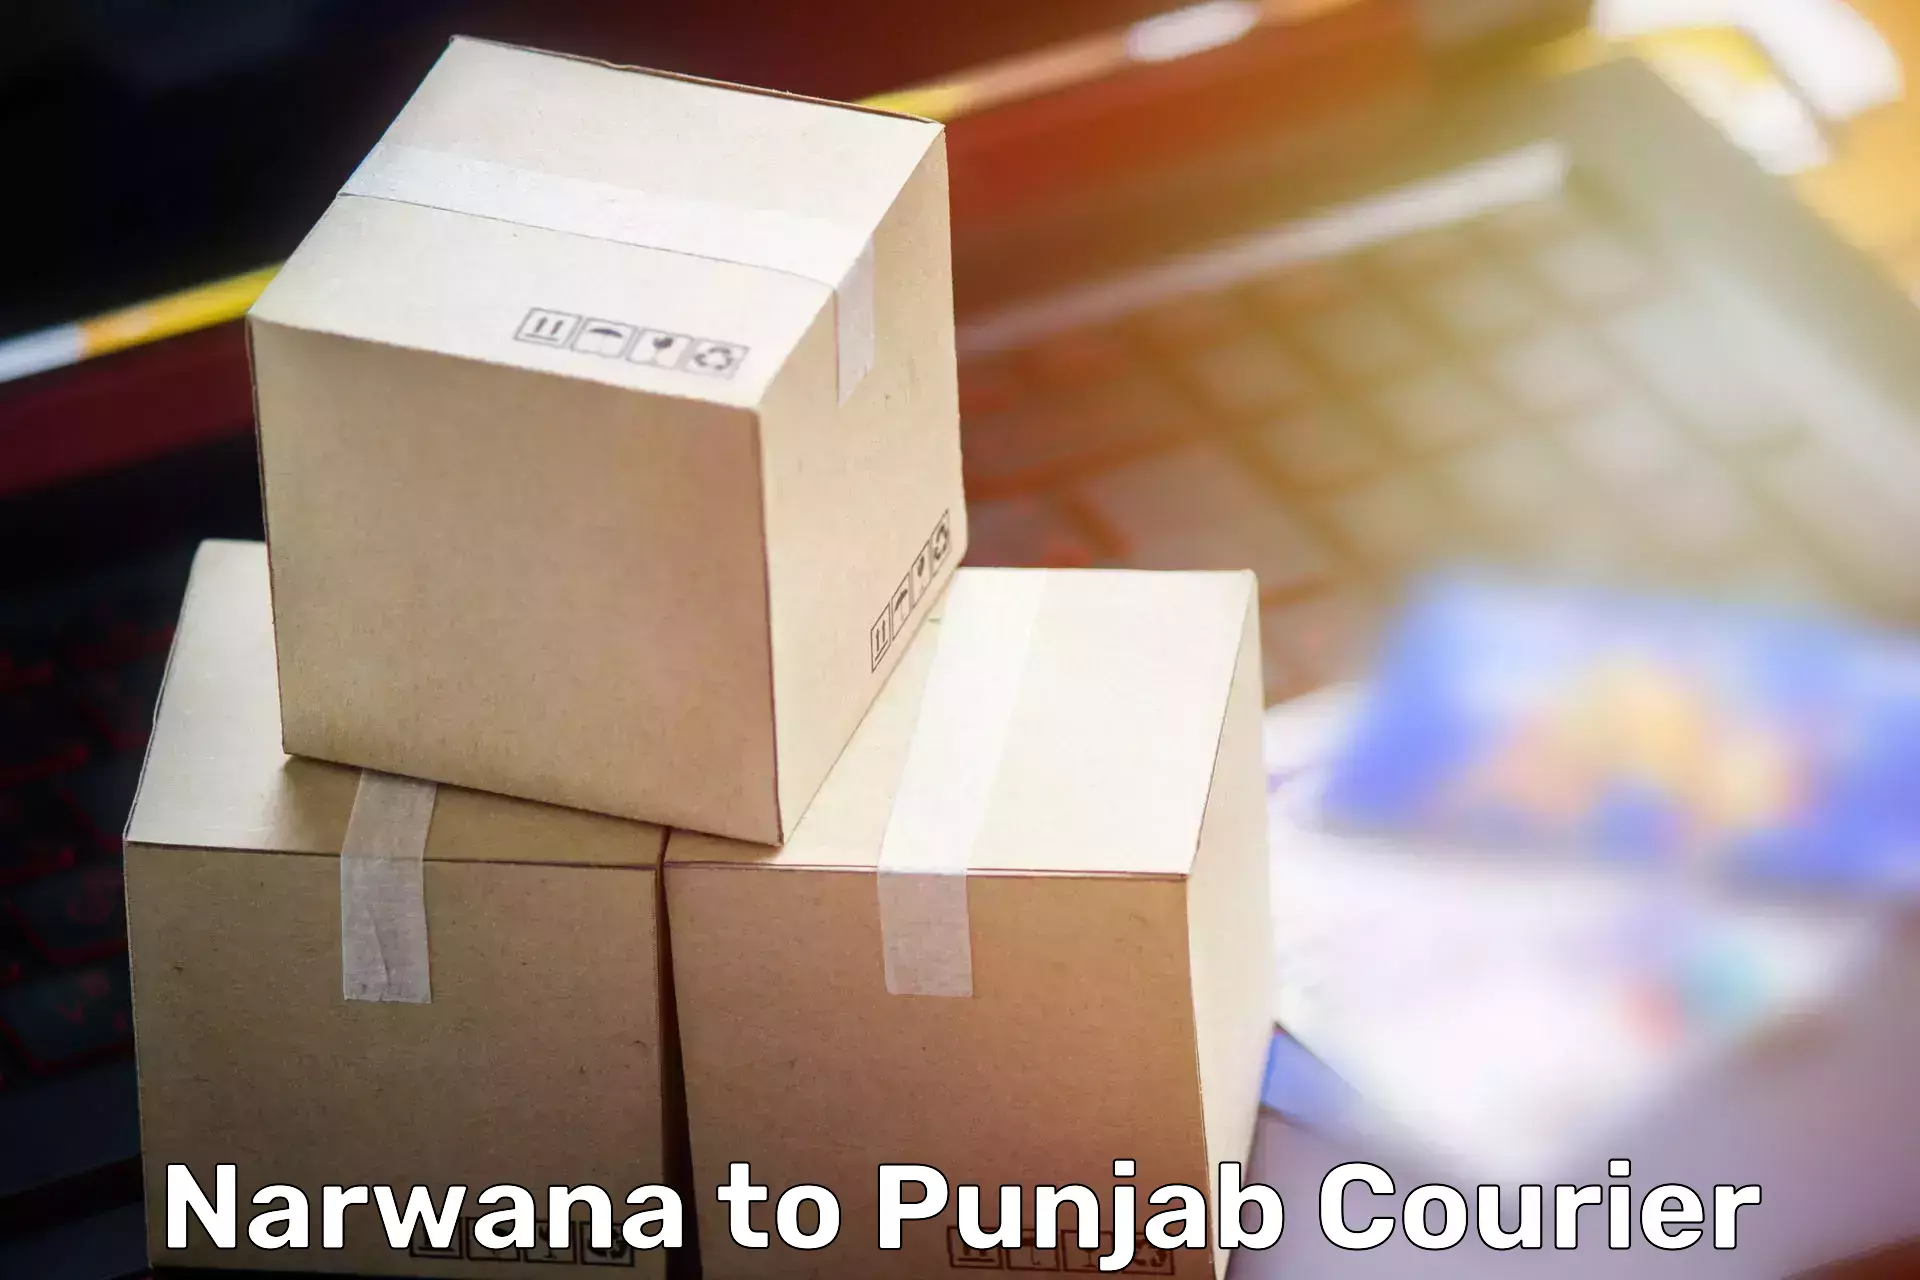 Professional packing services Narwana to Sirhind Fatehgarh